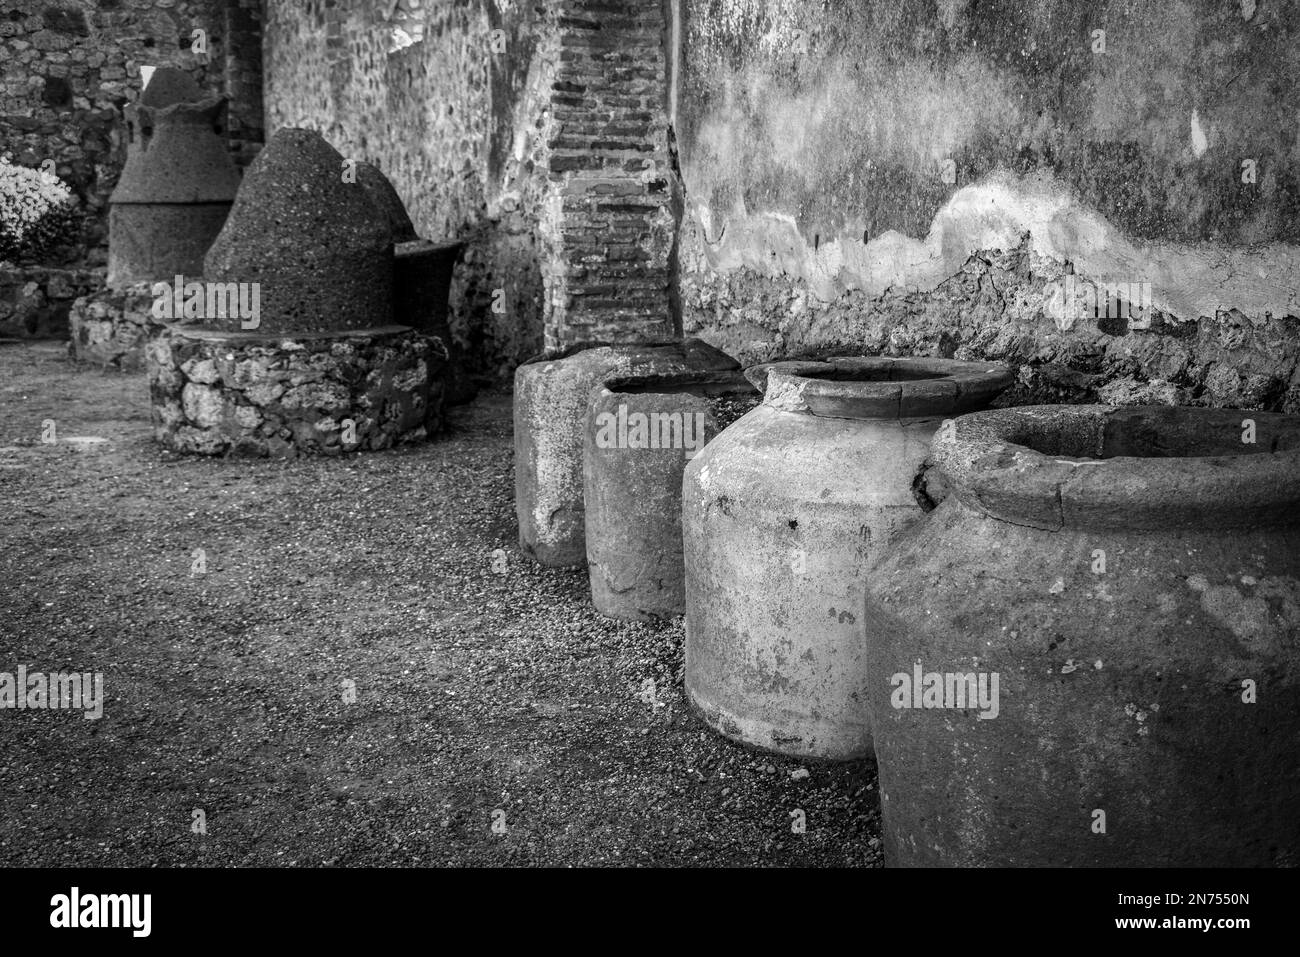 Pompeii, Italy, Big clay amphoras buried into the soil of an ancient Pompeian warehouse, Southern Italy Stock Photo